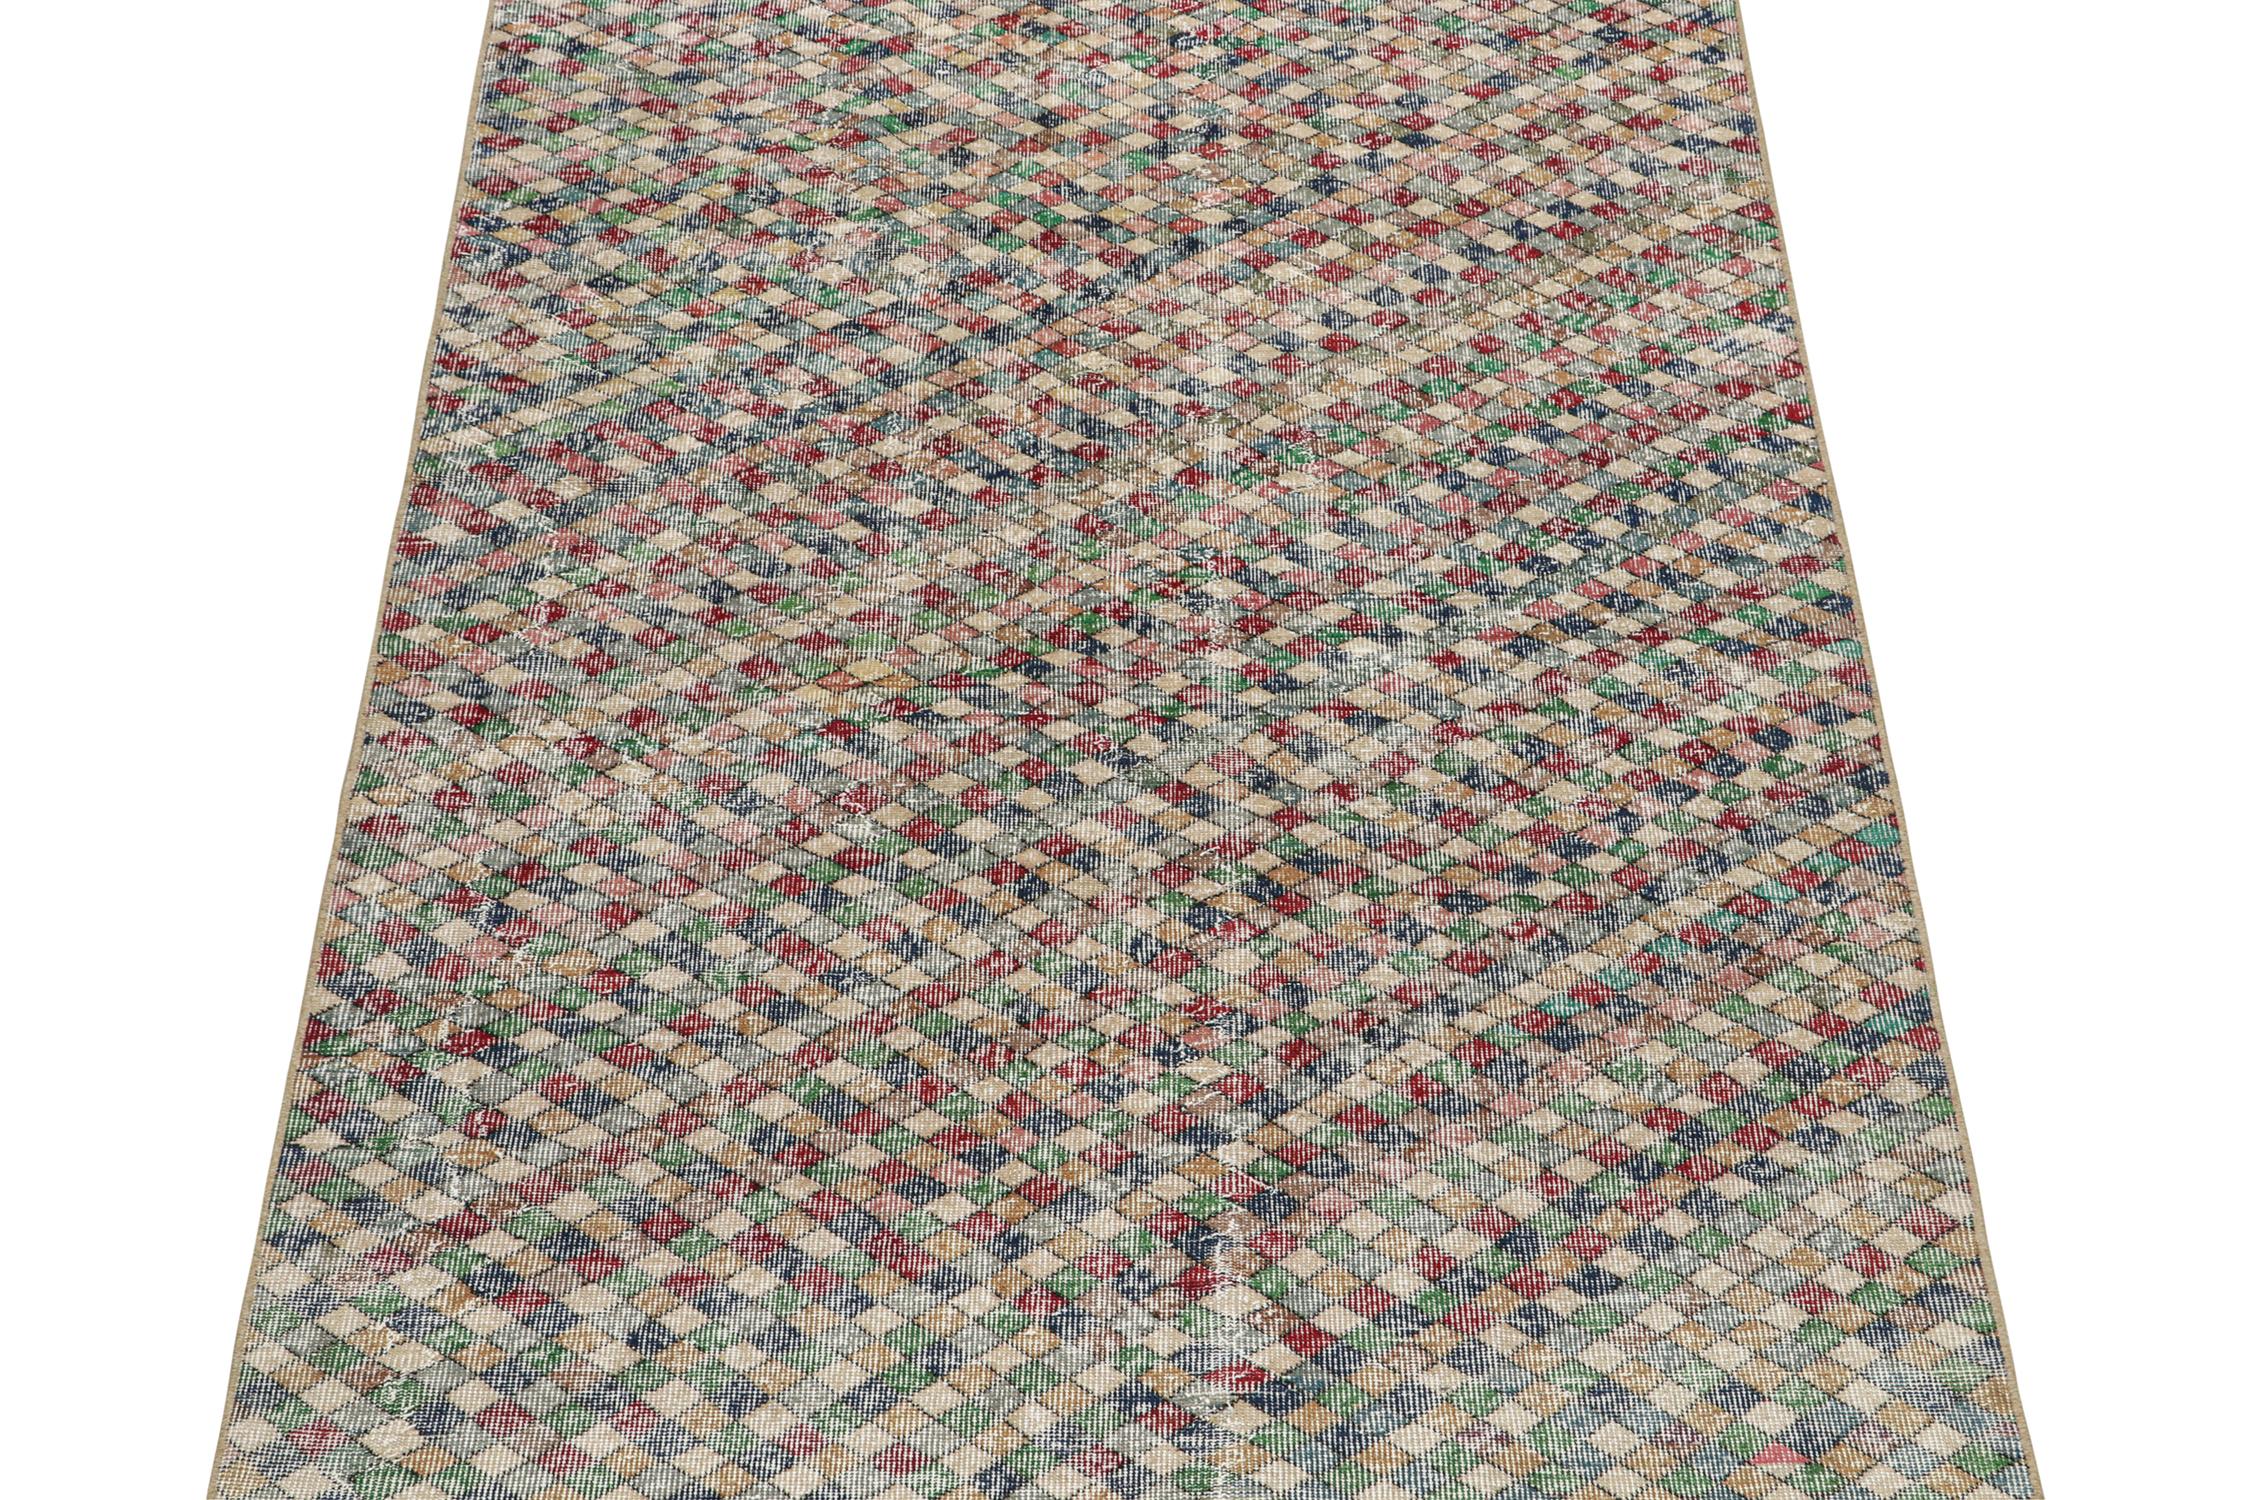 This vintage 5x8 rug is a new addition to Rug & Kilim’s midcentury Pasha Collection. This line is a commemoration, with rare curations we believe to hail from multidisciplinary Turkish designer Zeki Müren. 

Further on the Design:

This